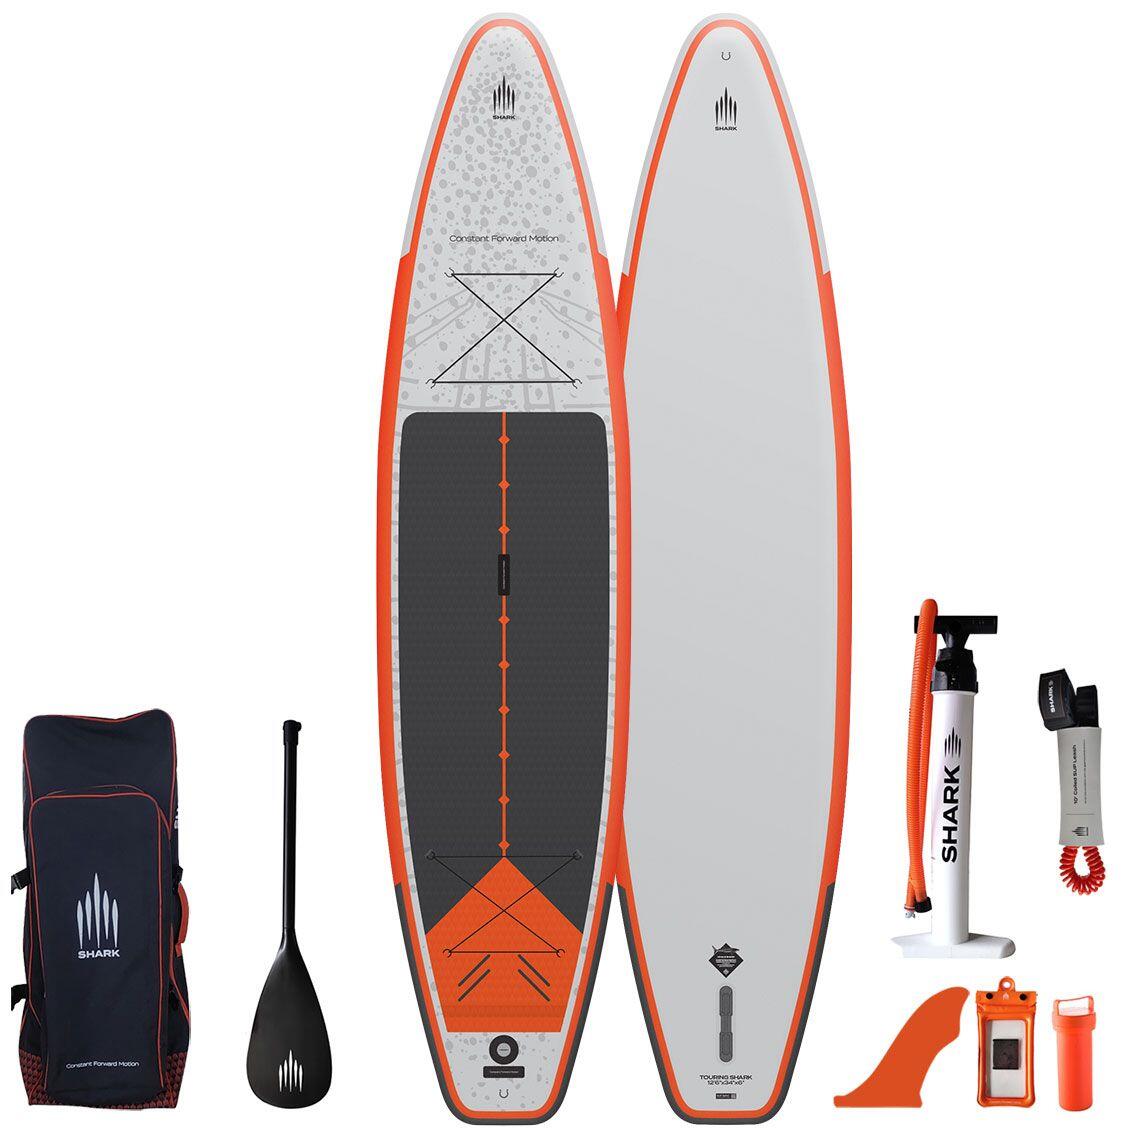 SHARK SHARK TOURING 12'6 x 34" x 6" FOR TALLER AND HEAVIER PADDLEBOARDERS